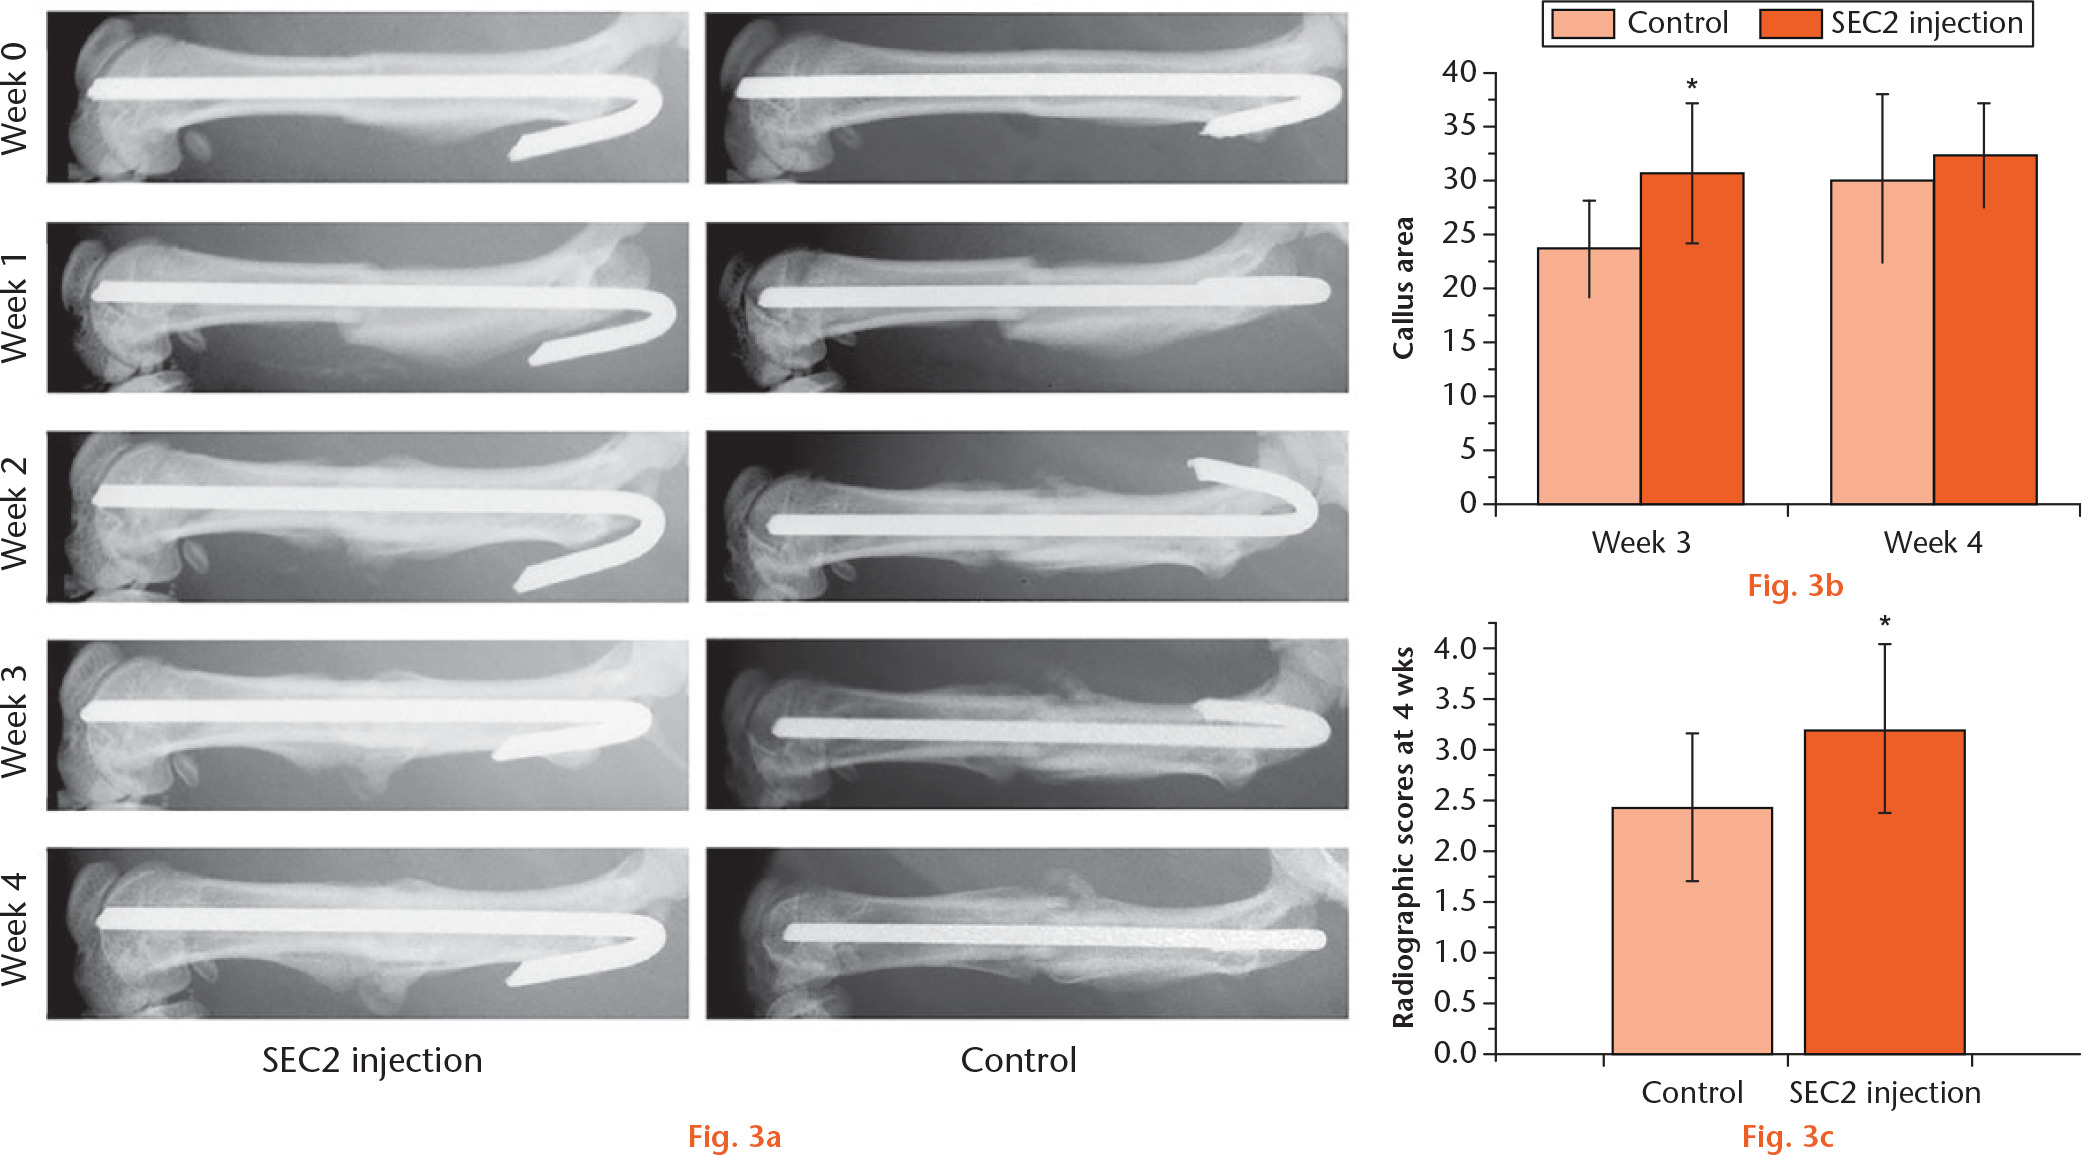  
            a) Radiographic analyses of fracture healing with Staphylococcal enterotoxin C2 (SEC2) treatment. Bone formation in fracture sites was detected by x-ray assays. b) Graph showing that larger callus areas were found in the SEC2-treated group. c) Graph showing that higher radiographic scores were observed in the SEC2-treated group. *p < 0.05 versus control.
          